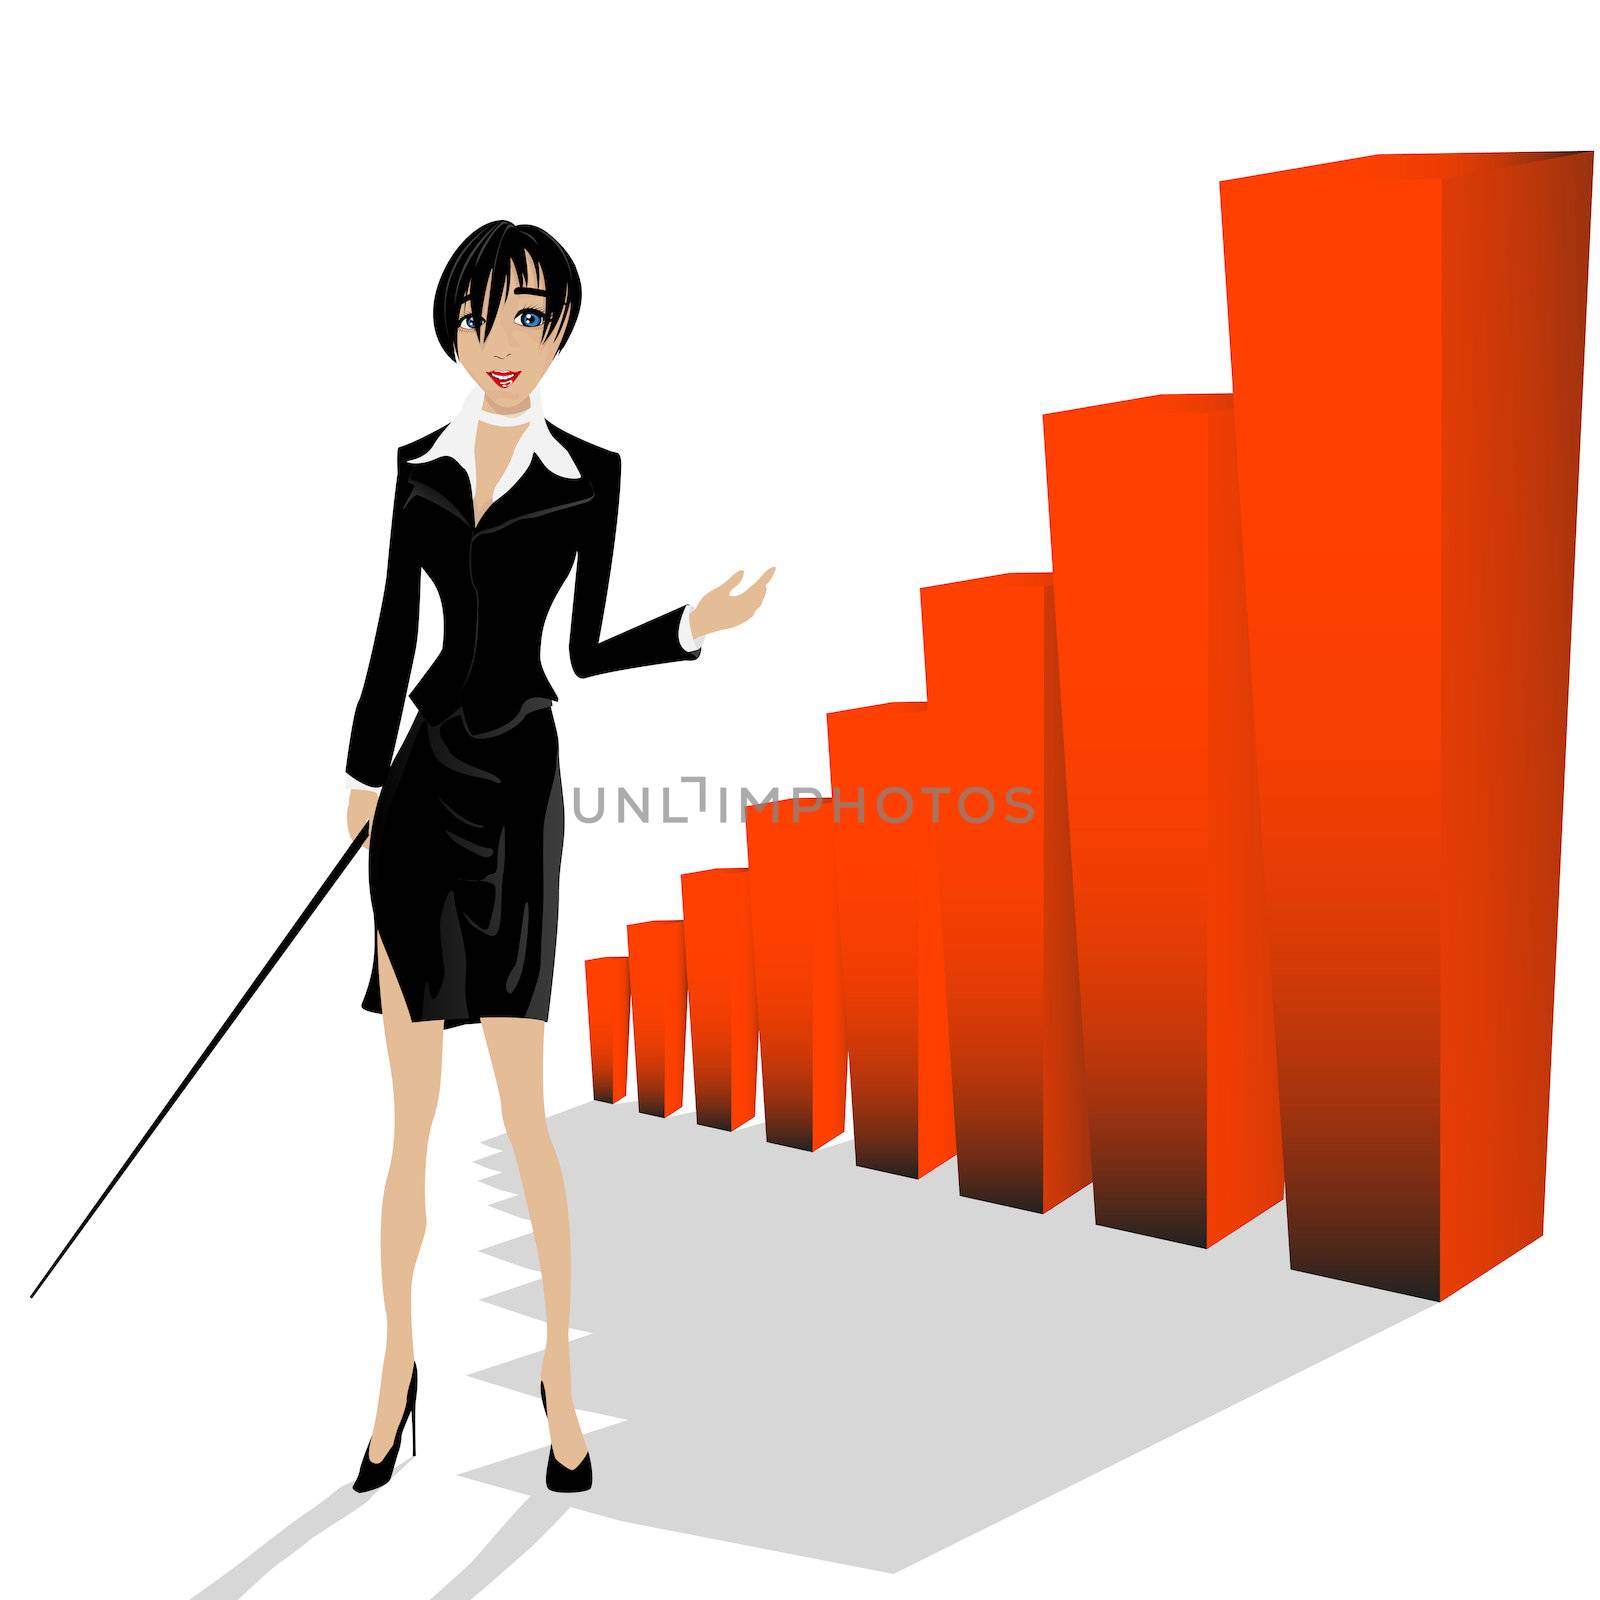 Conceptual layout with a business woman presenting statistic bars